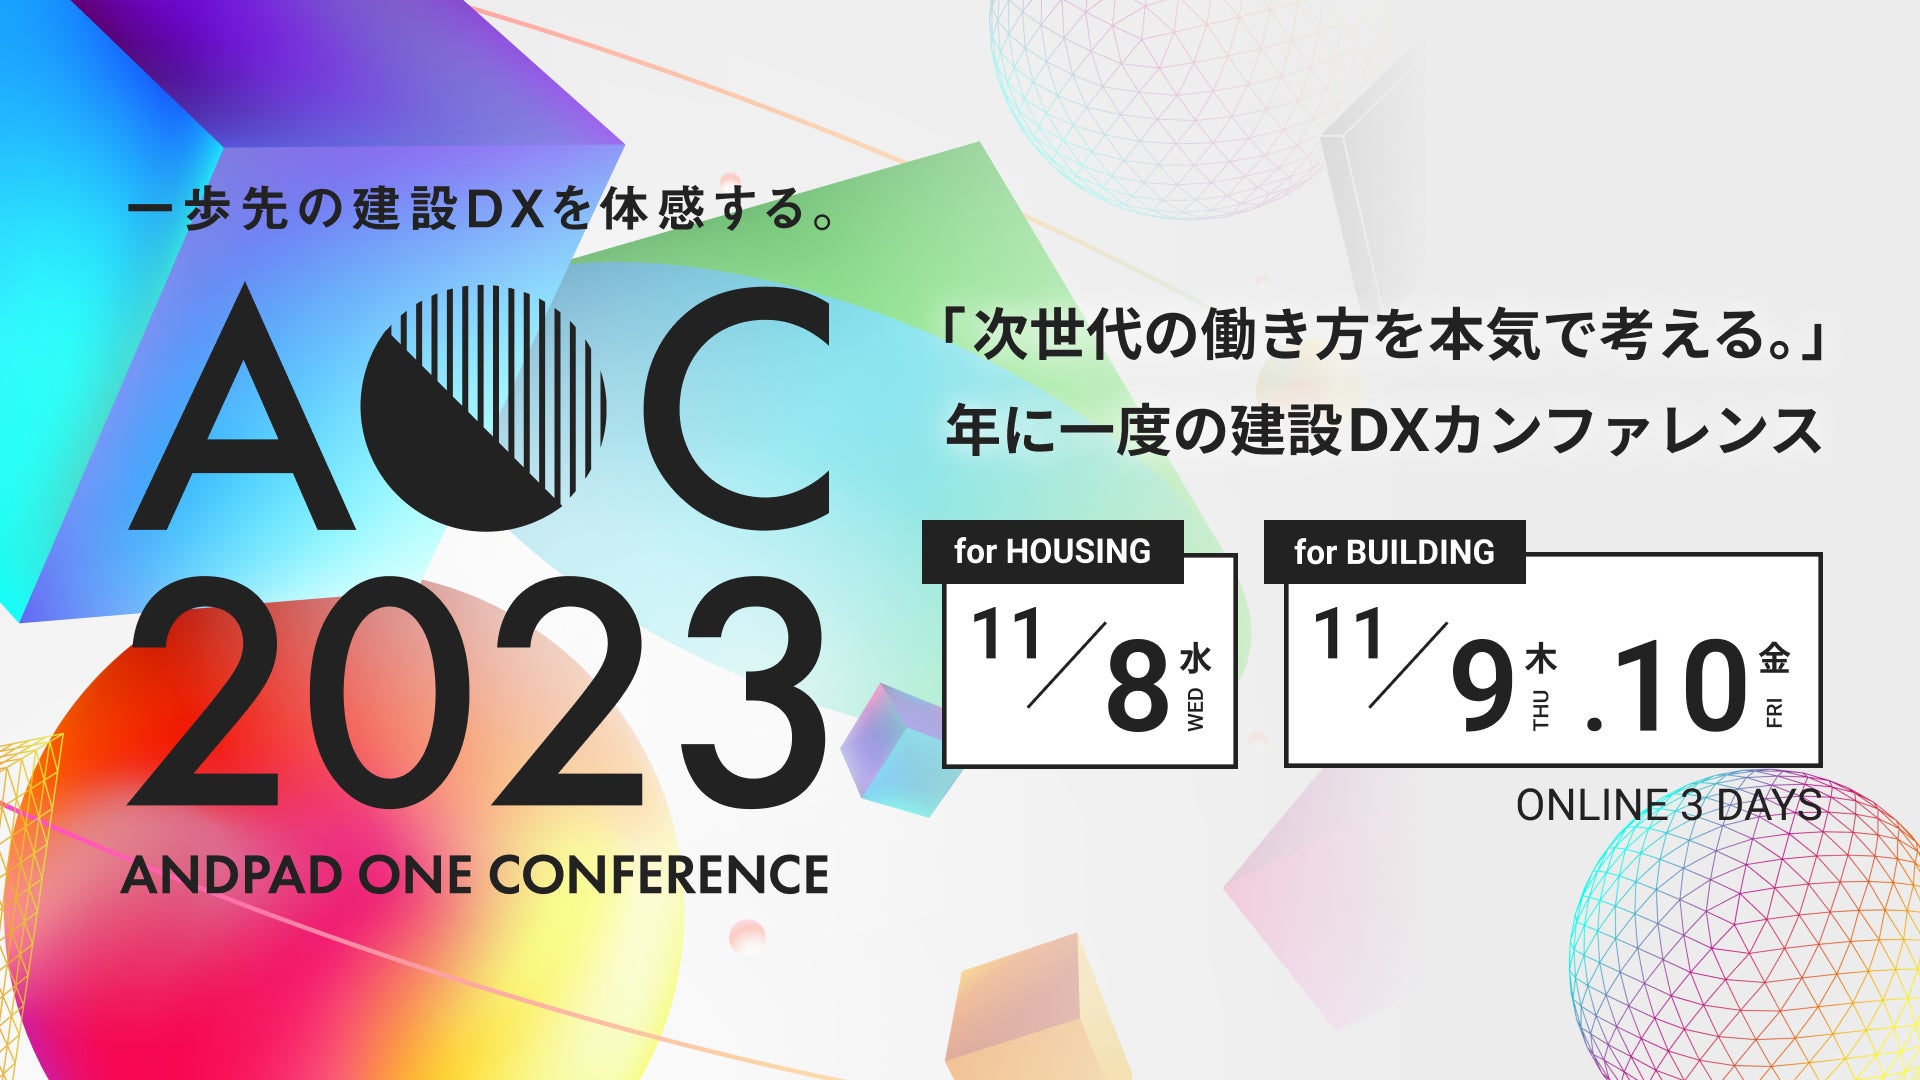 「ANDPAD ONE CONFERENCE 2023」を開催決定のサブ画像1